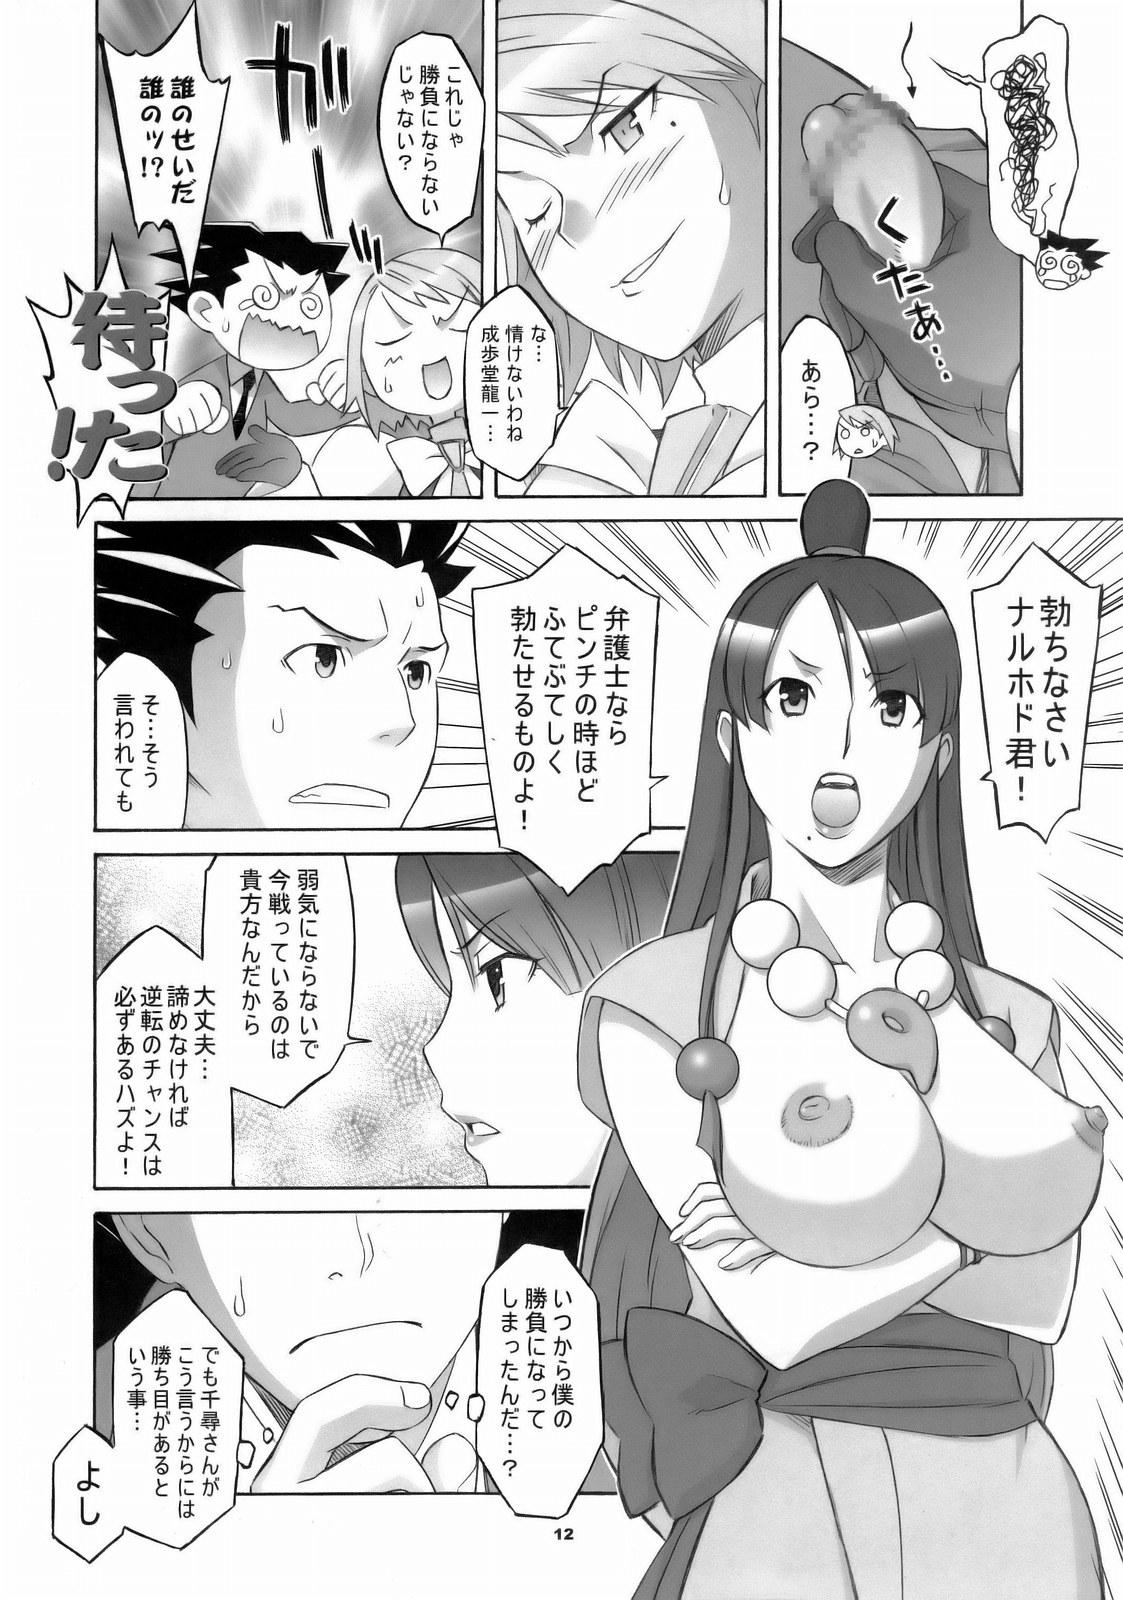 Fingering Gyakuten Shaiban - Ace attorney Three Some - Page 11